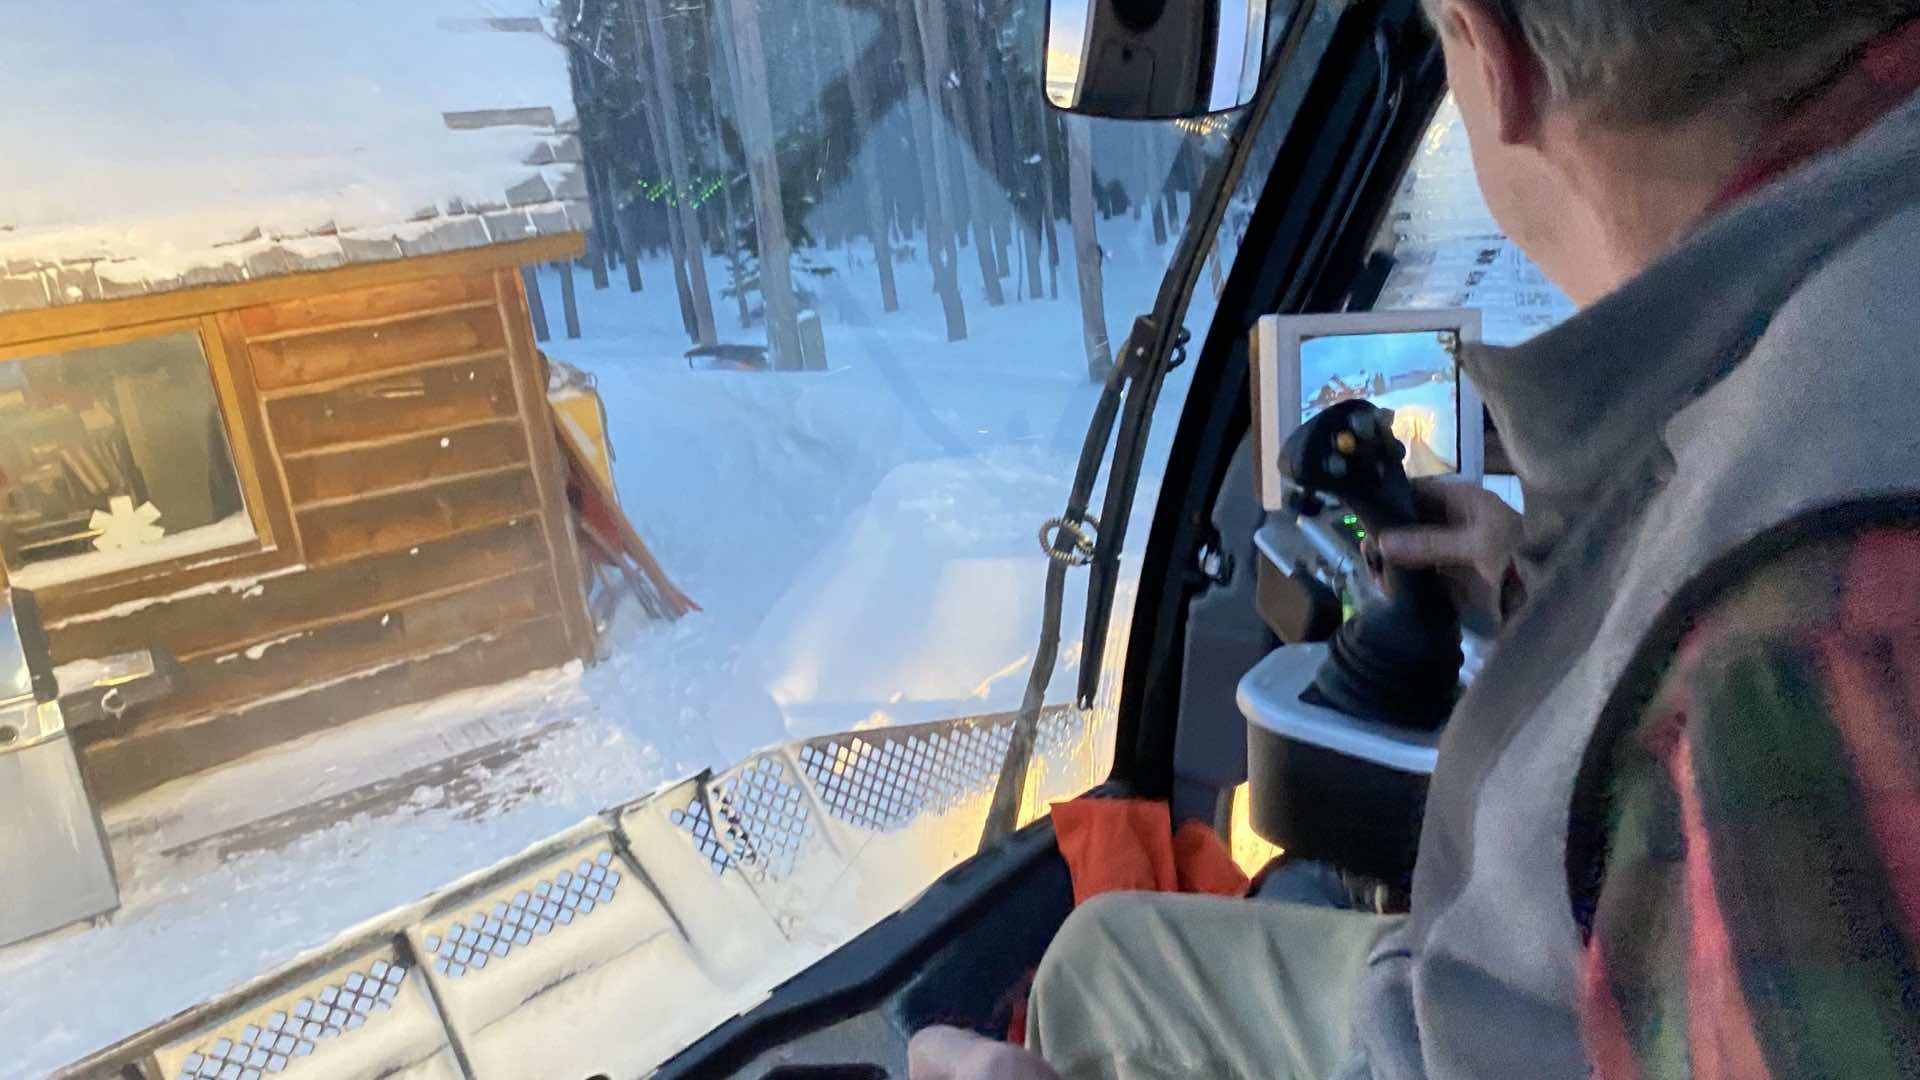 Looking through the window of a snowcat